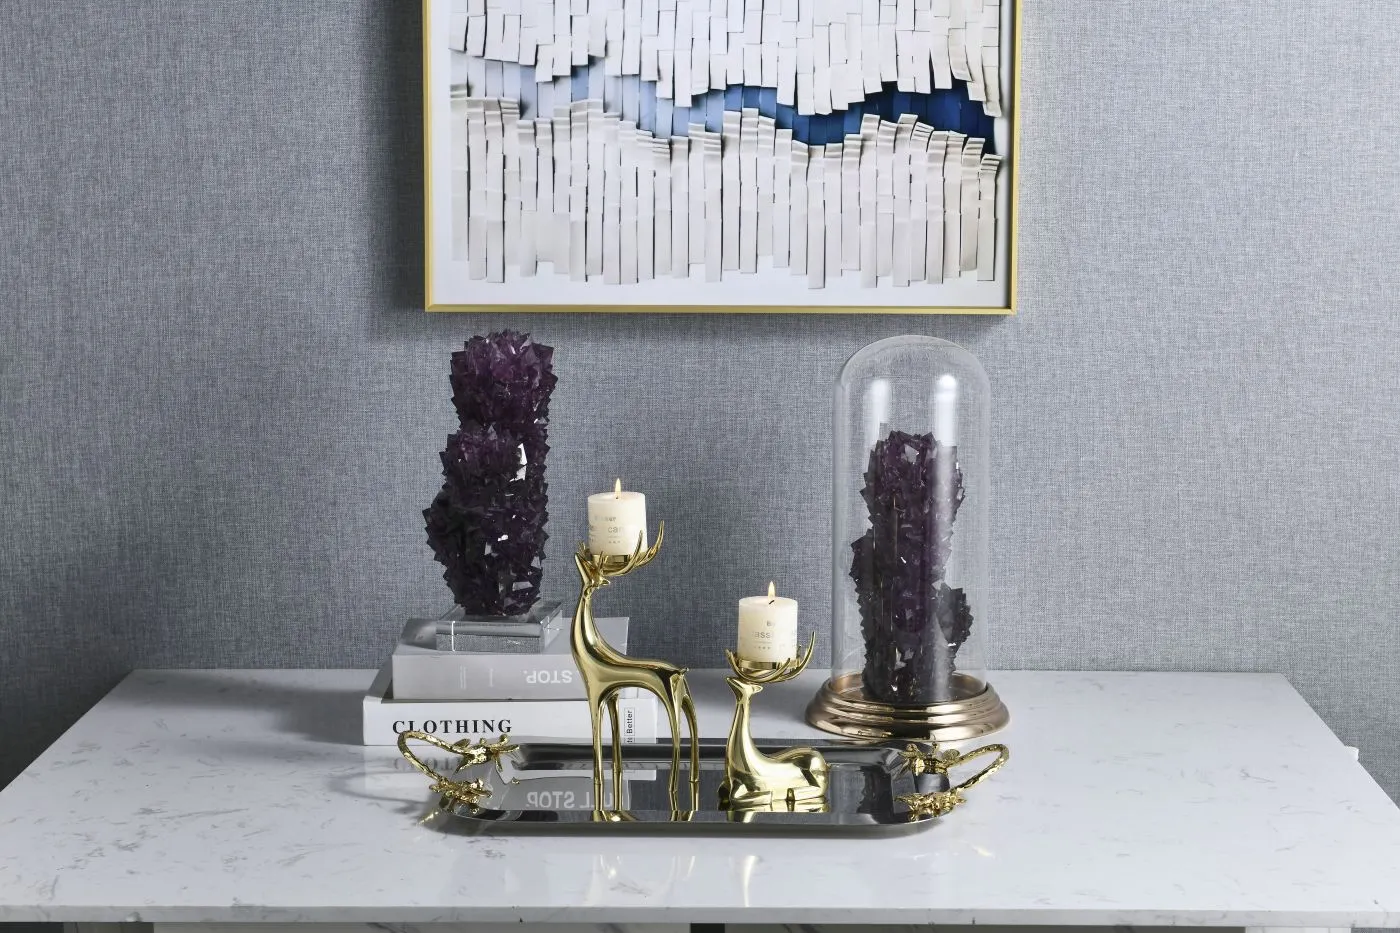 A Glimpse of Luxurious Living – Art on the Table